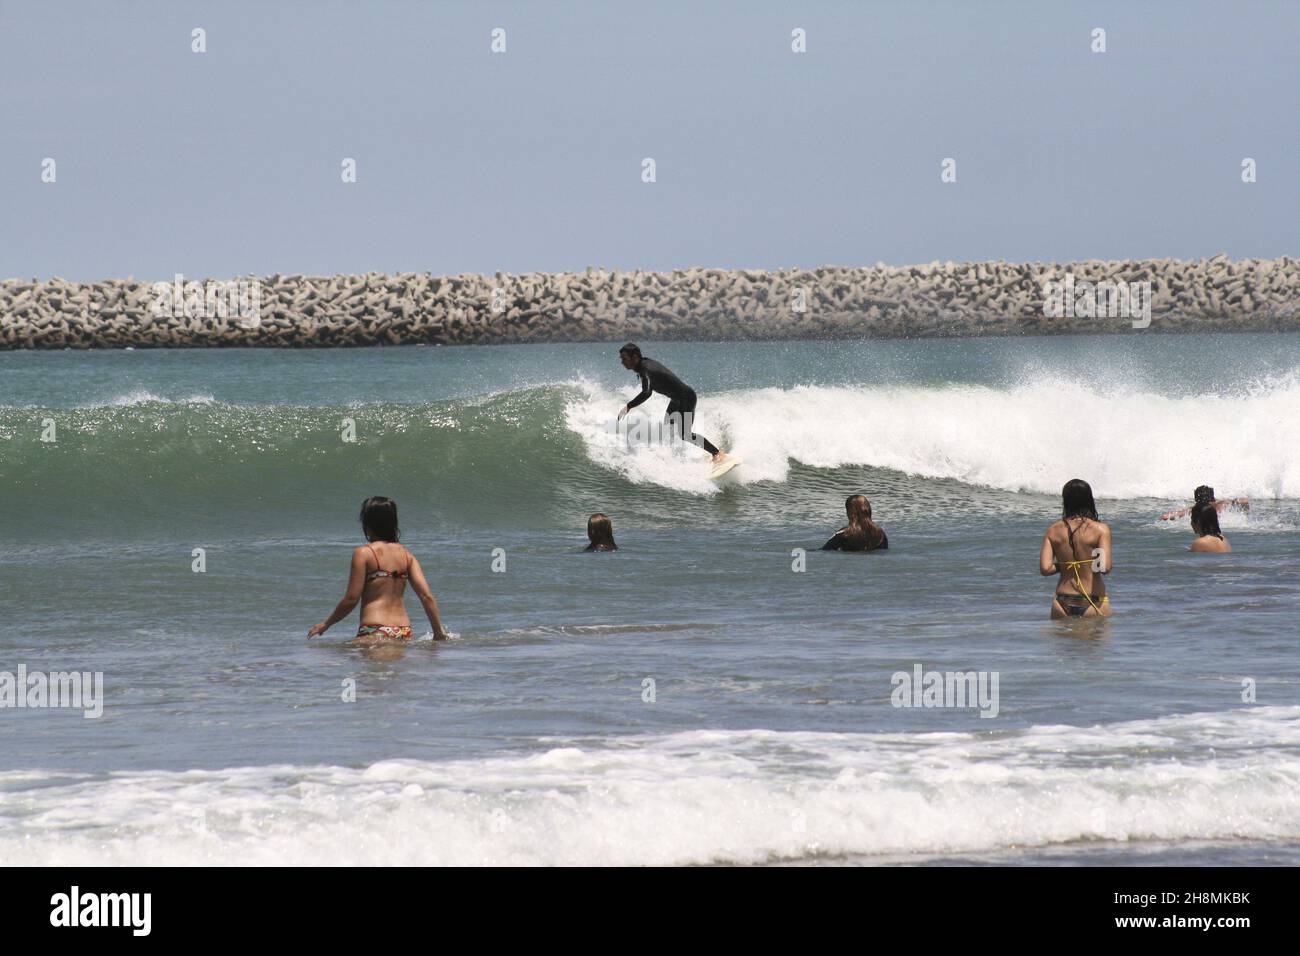 NECOCHEA, ARGENTINA - Sep 08, 2005: The people surfing in Necochea, buenos Aires, Argentina Stock Photo